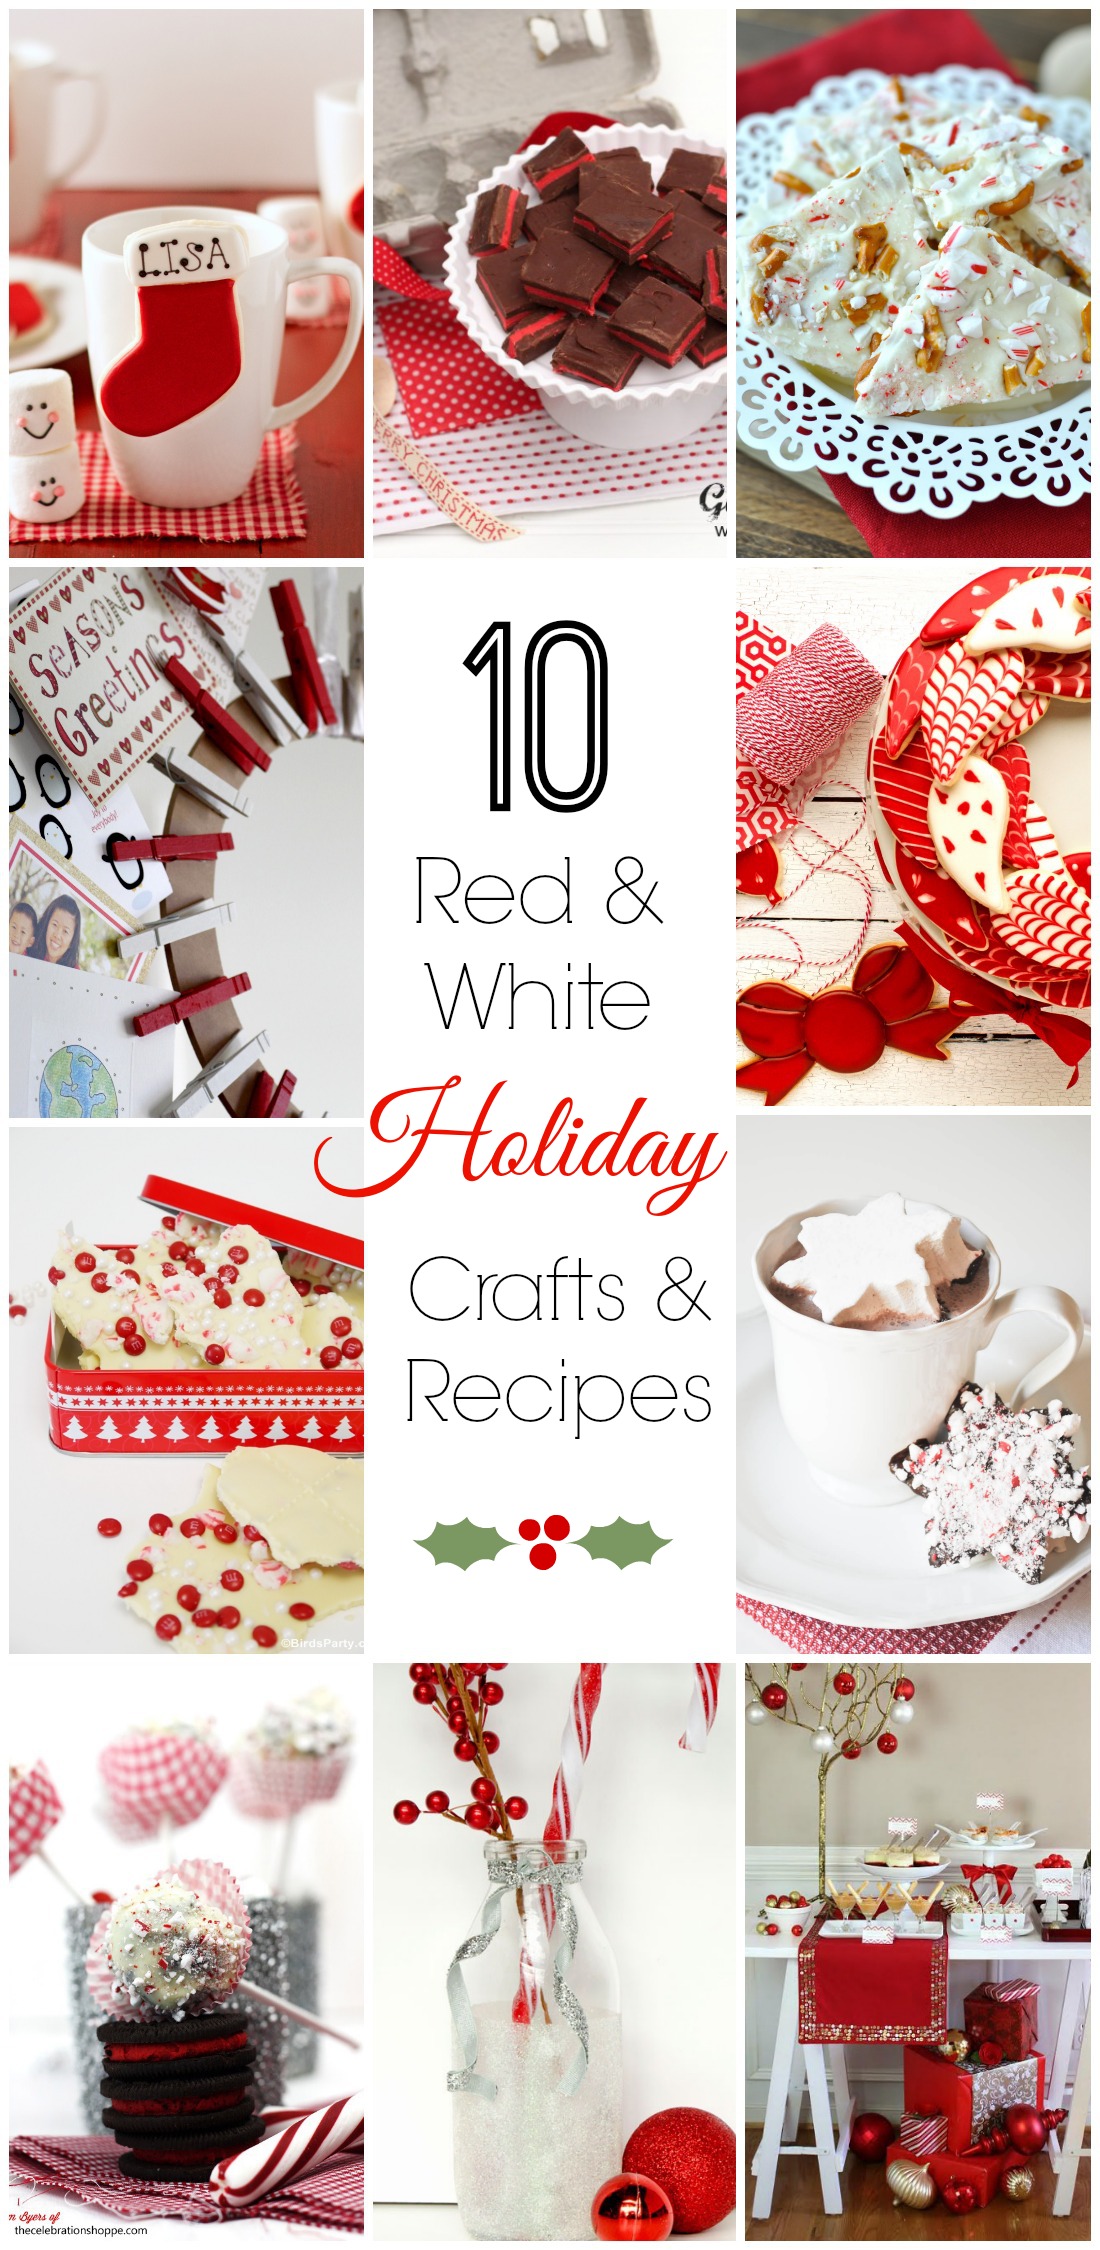 10 Red and White Holiday Crafts & Recipes | Catch My Party